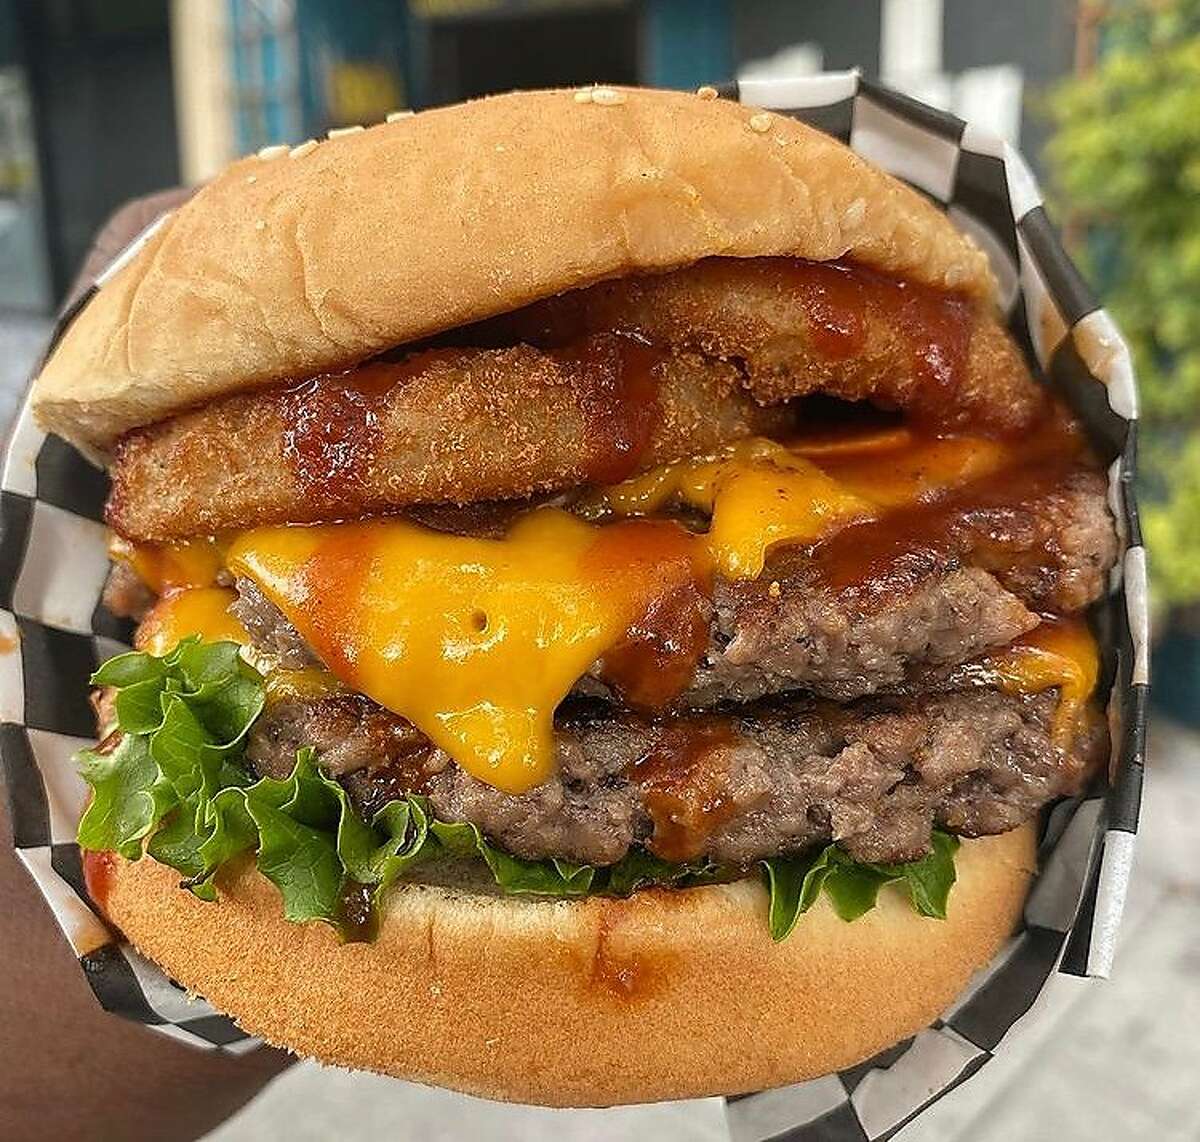 The Ghost Town Burger from Malibu's Burger is a vegan take on a classic western, with onion rings, barbecue sauce and American cheese.